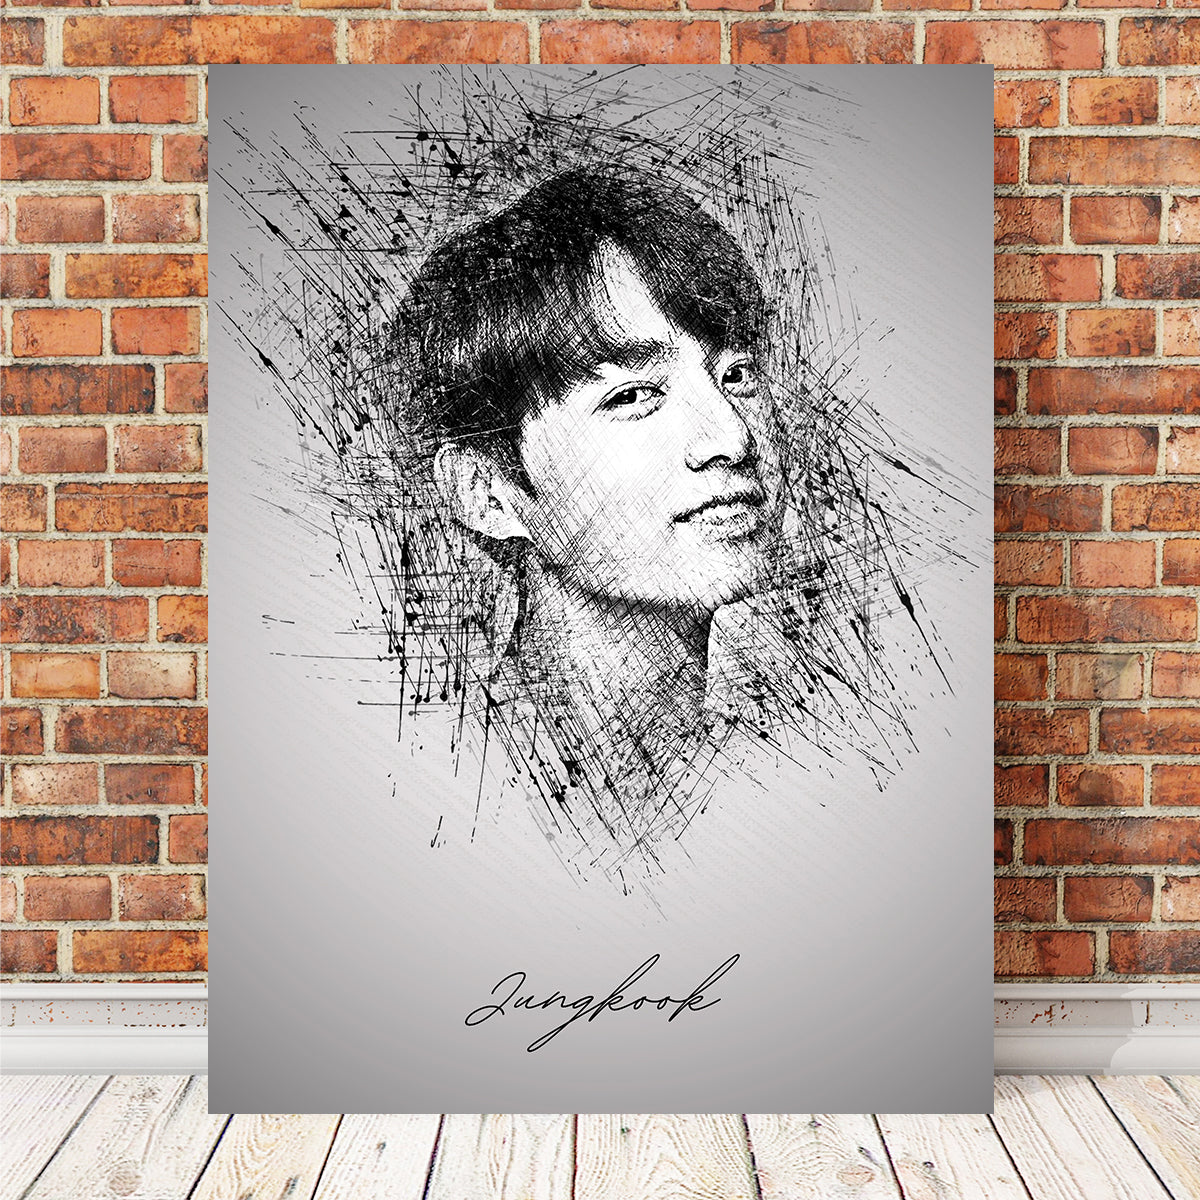 Jungkook cookie | Pencil sketch images, Color drawing art, Cool pencil  drawings